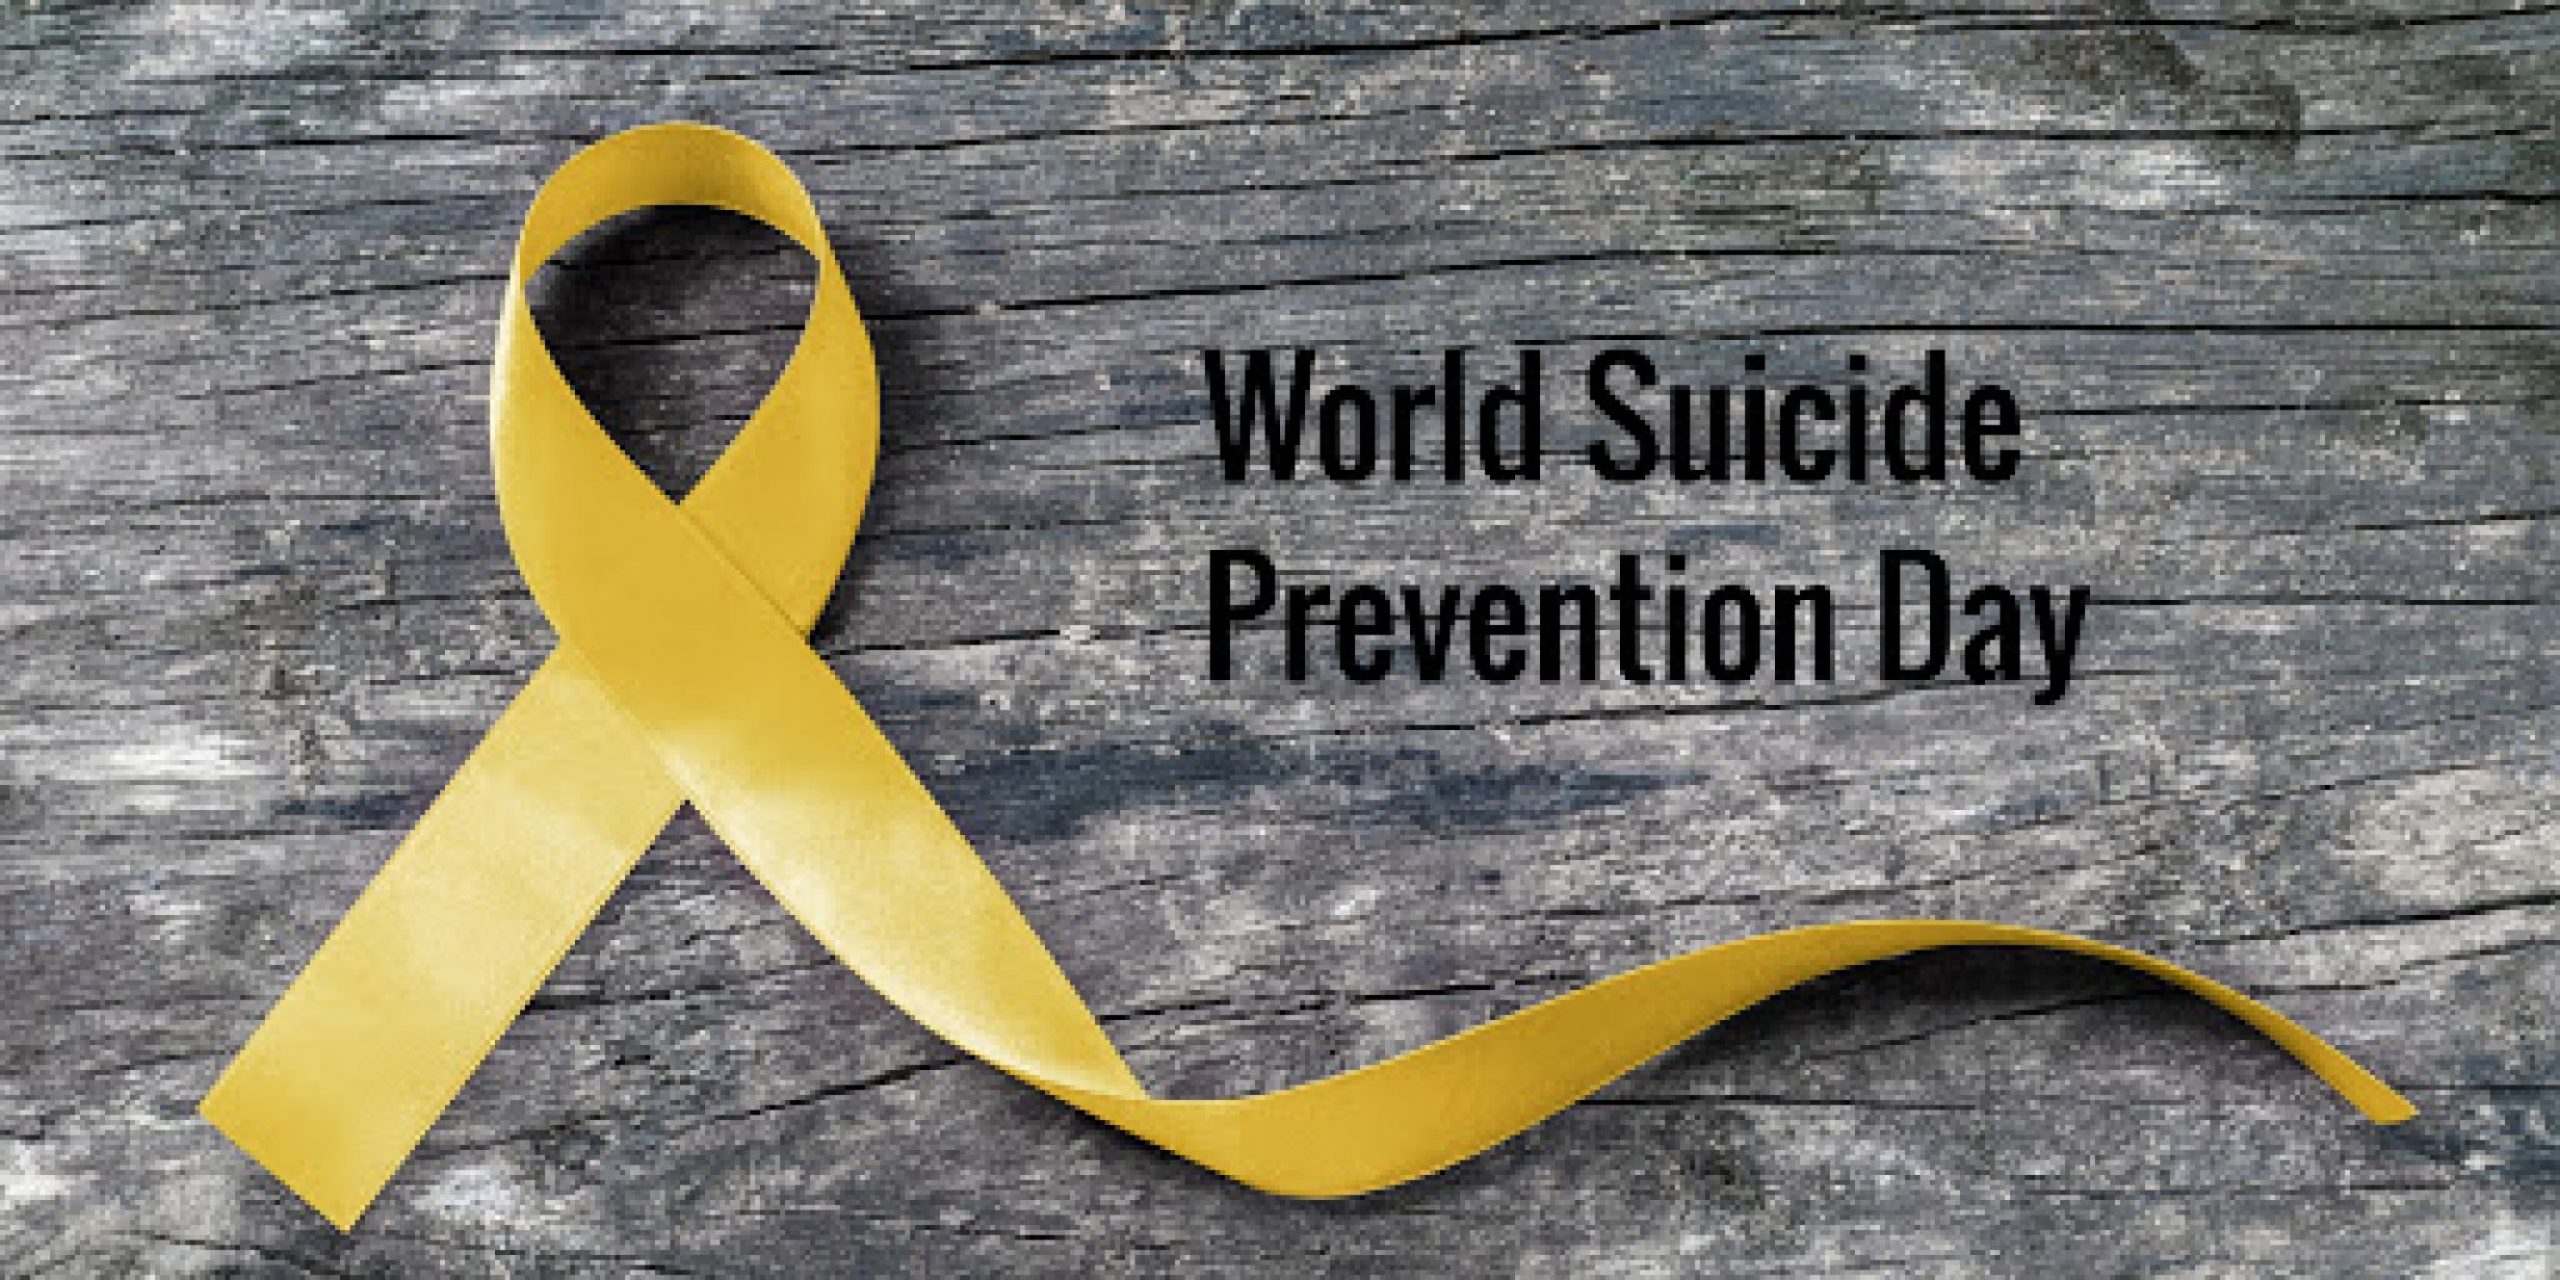 World Suicide Prevention Day 2020: The Enabler Culture